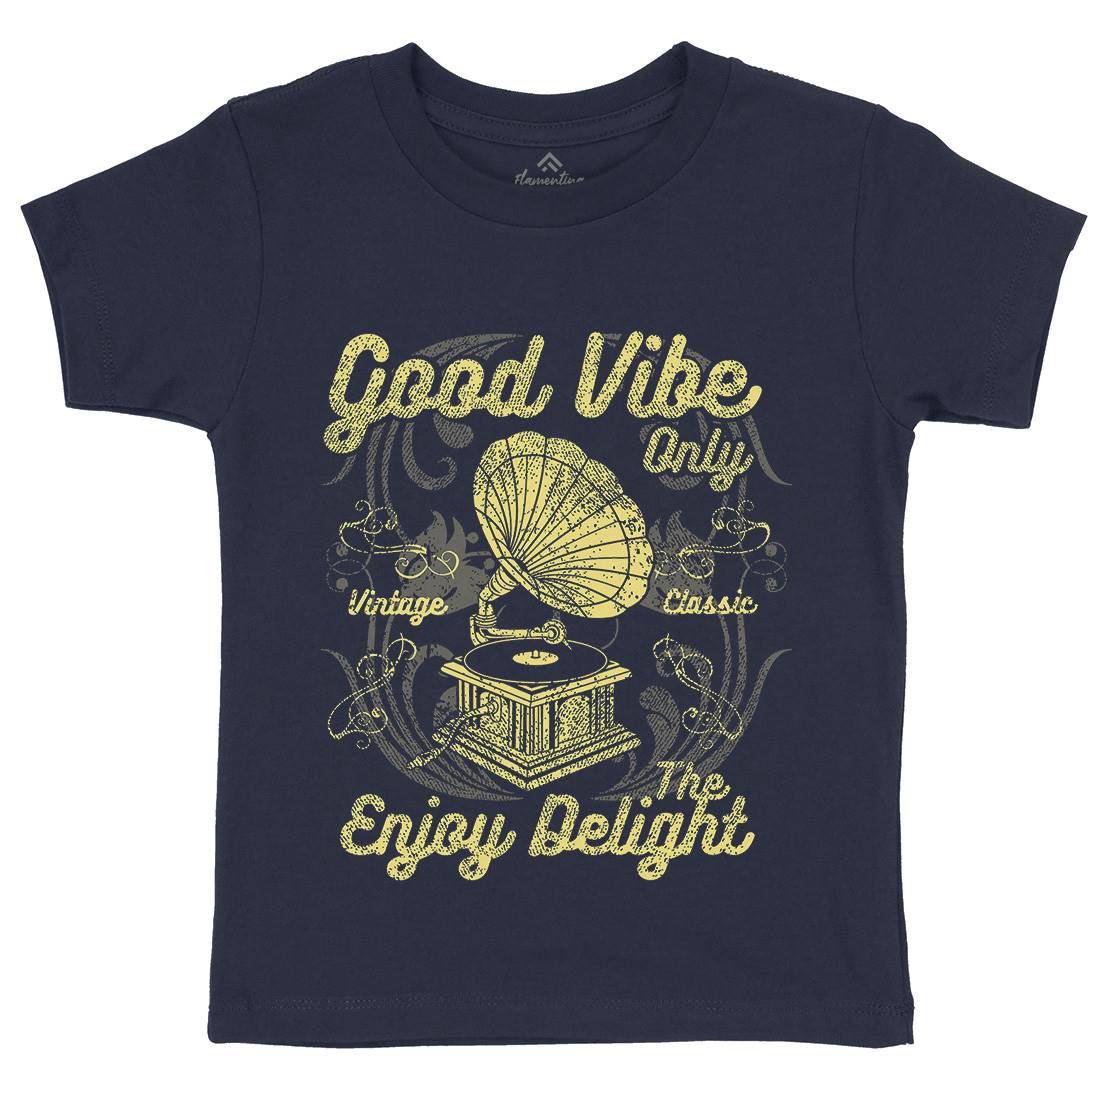 Good Vibe Only Kids Crew Neck T-Shirt Music A059